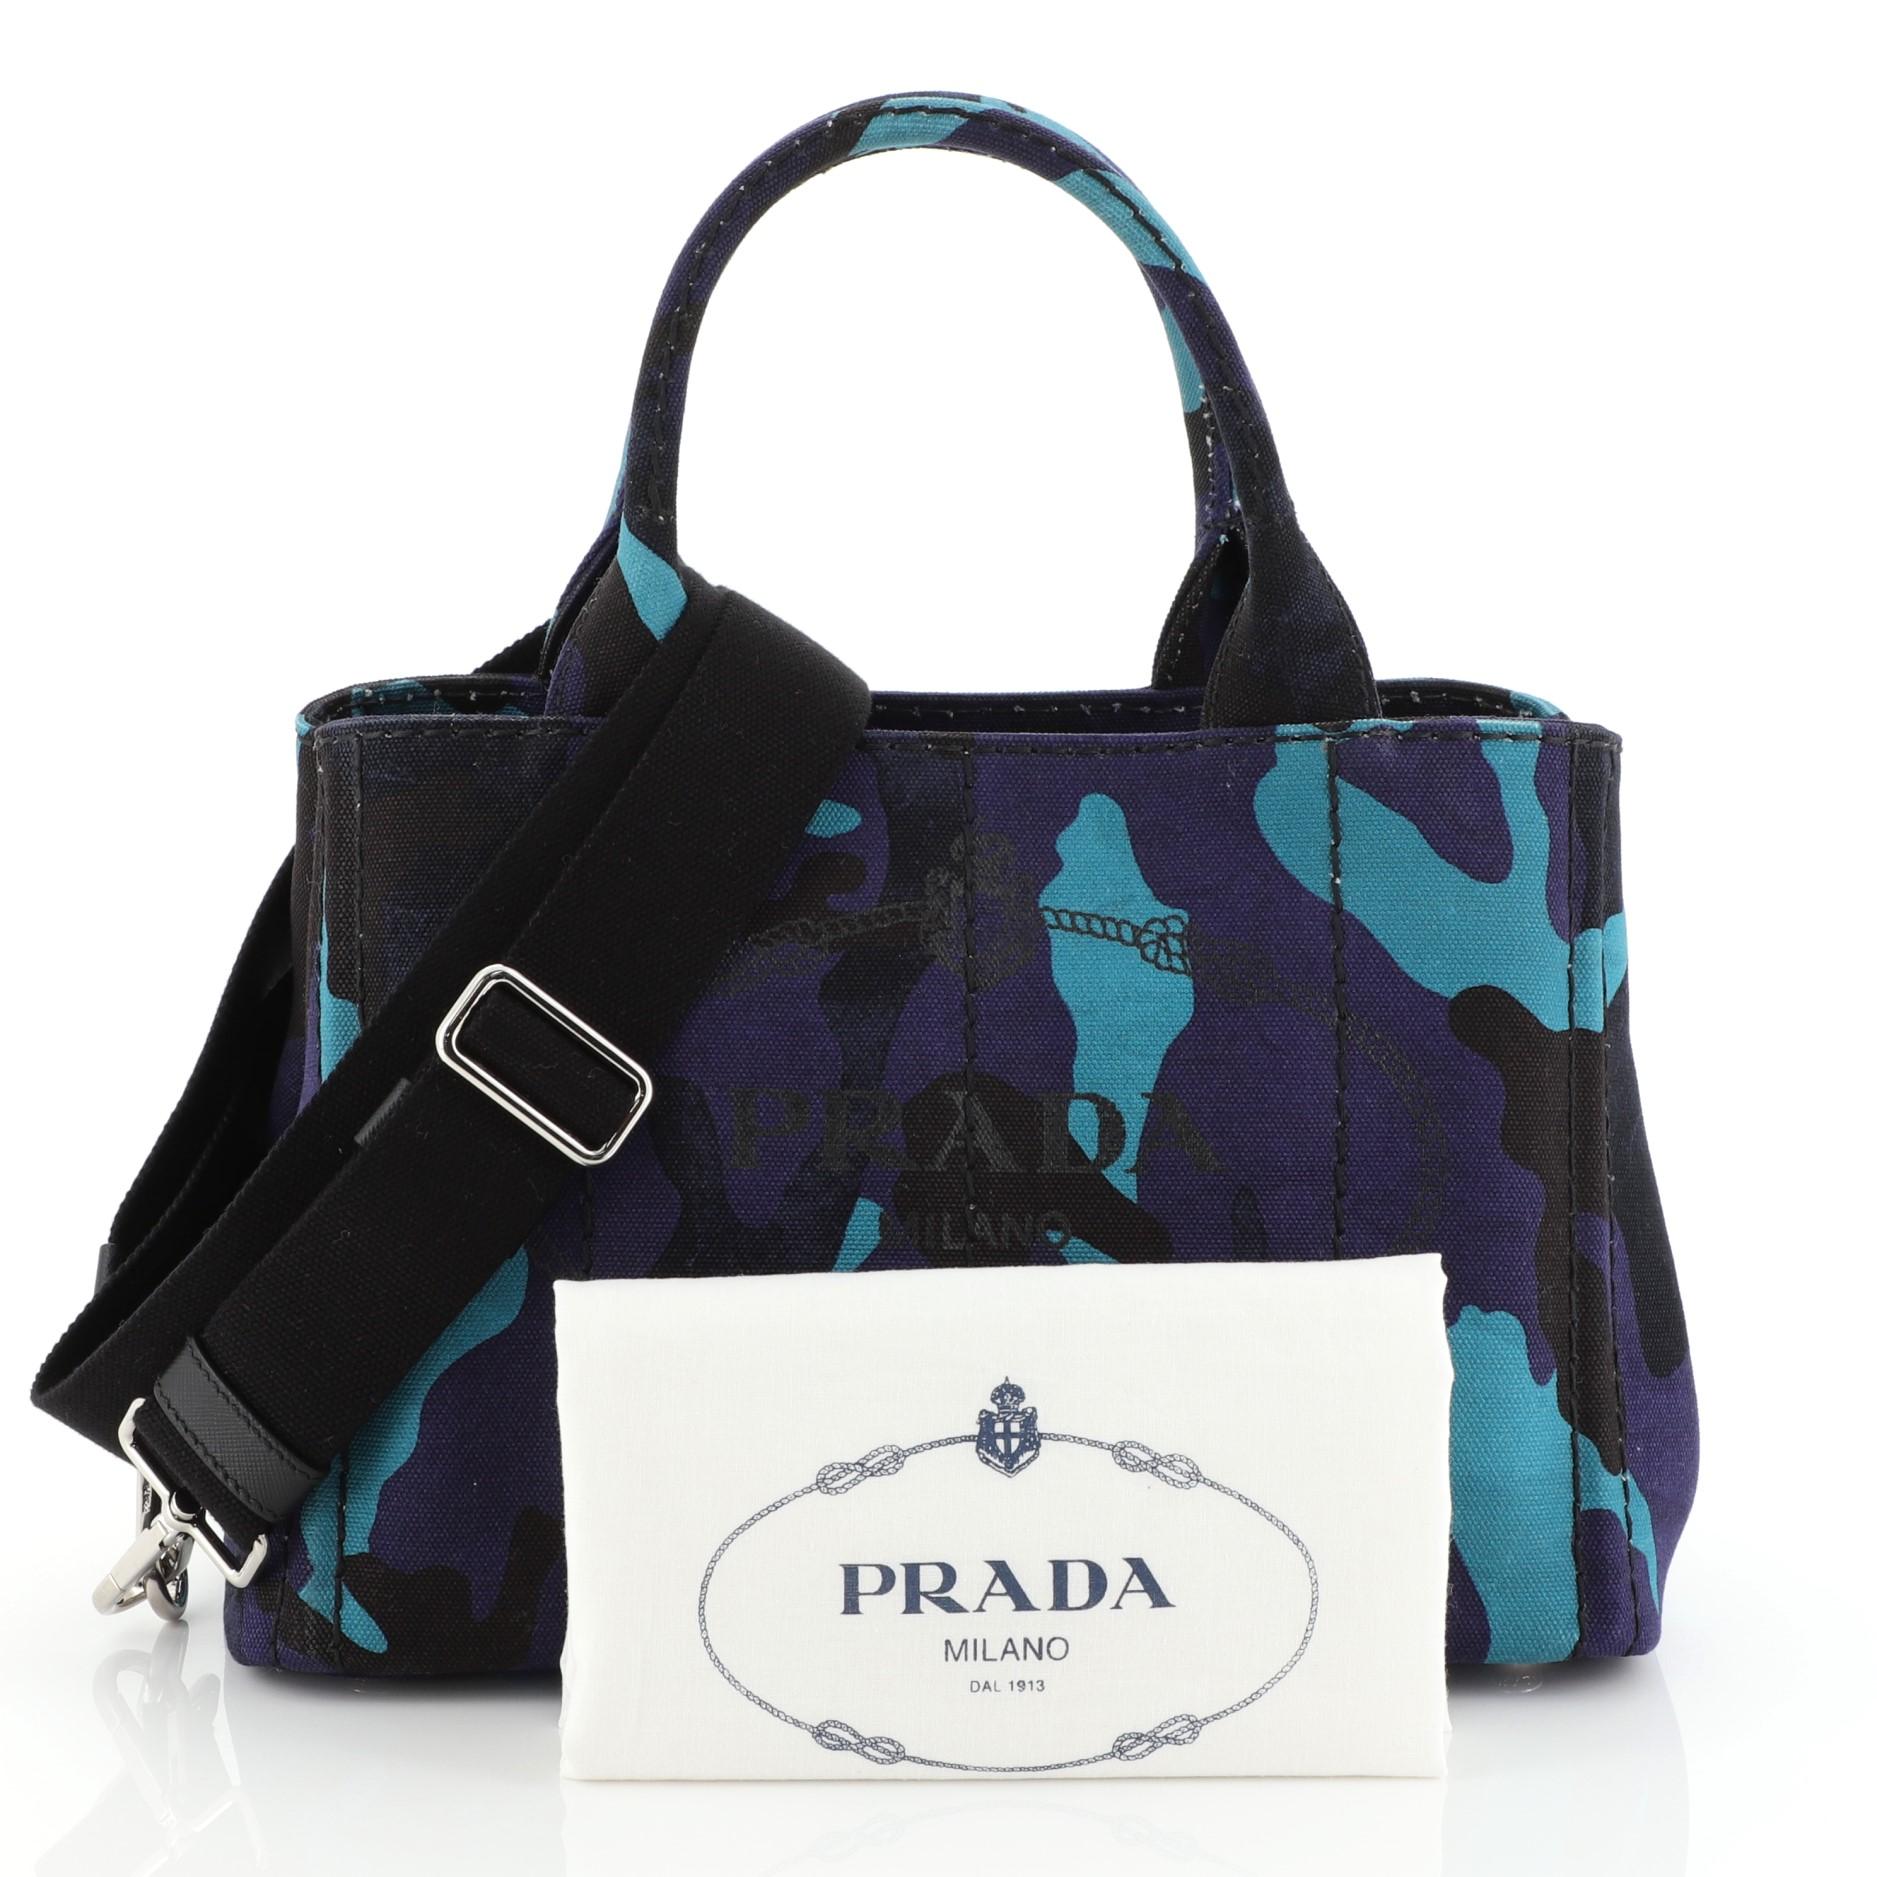 This Prada Canapa Convertible Tote Printed Canvas Mini, crafted from blue and purple printed canvas, features dual rolled handles, side snap buttons, and silver-tone hardware. It opens to a black canvas interior with zip and slip pockets.